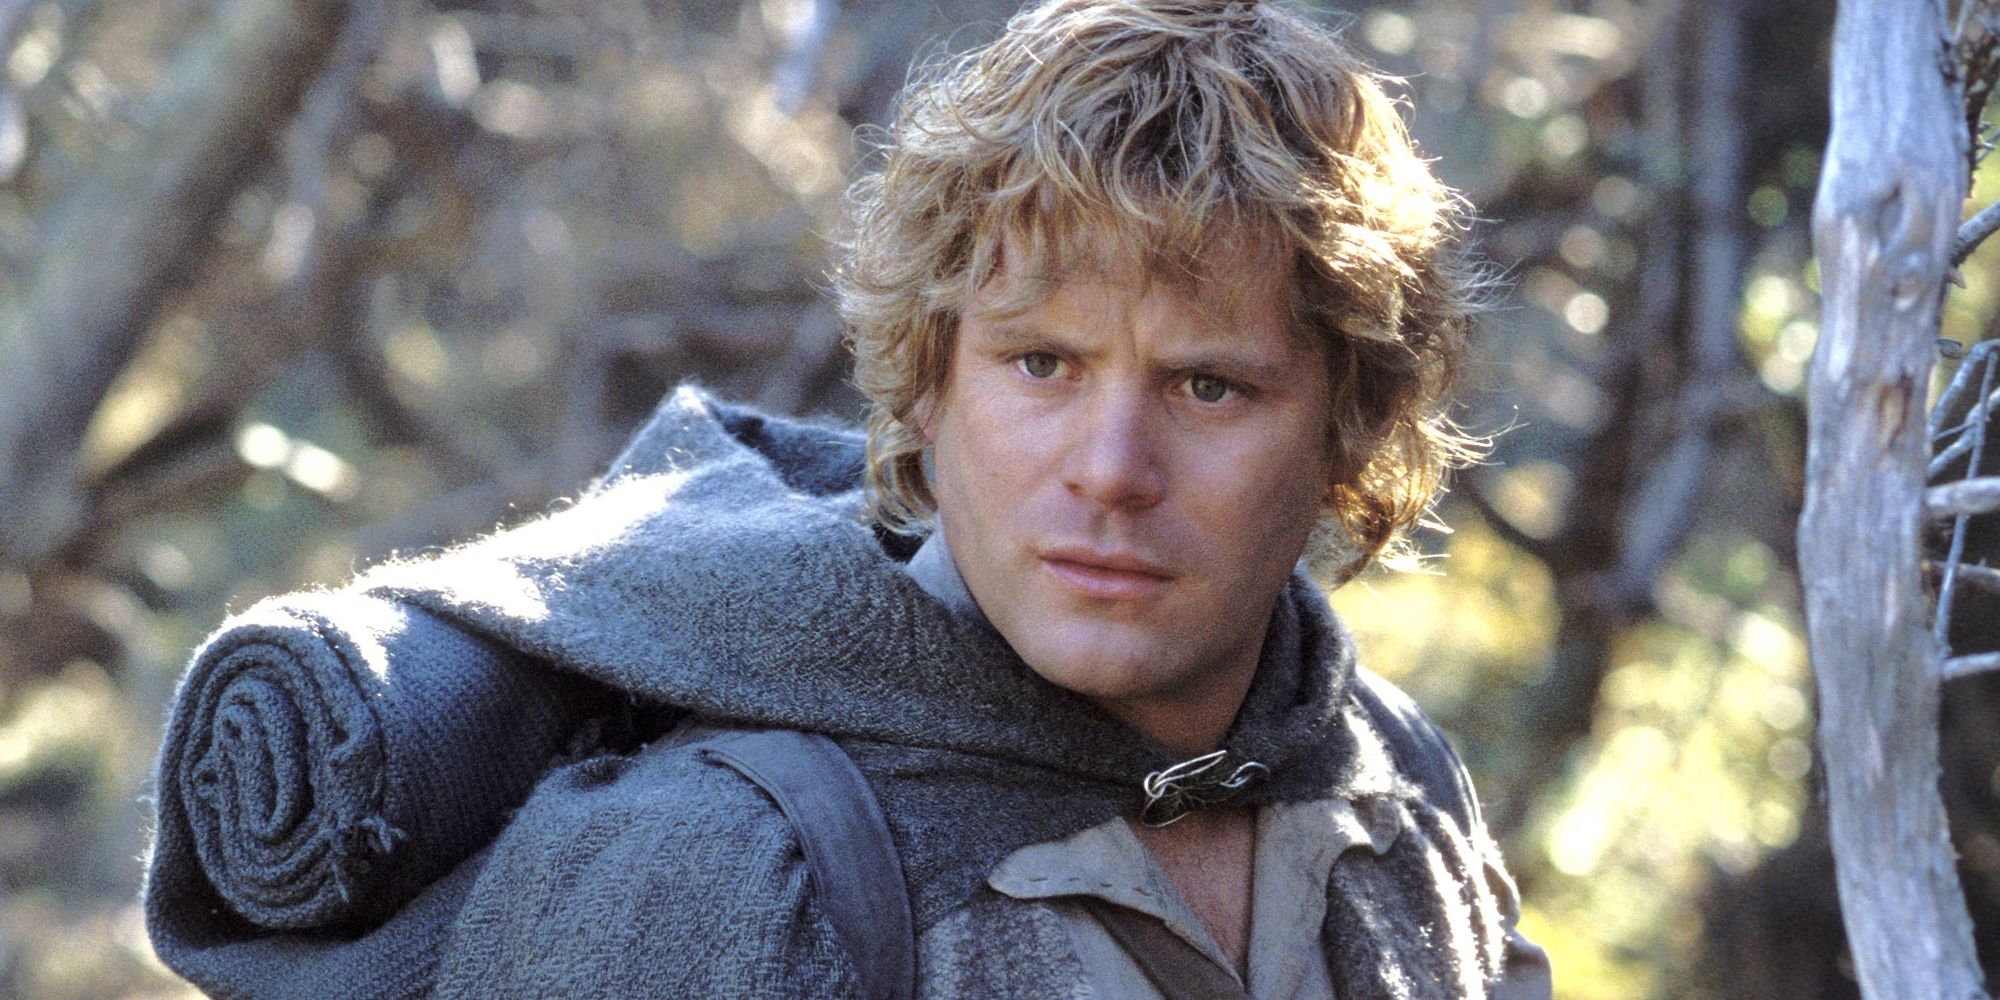 Rooted hair color for Samwise? Sean-Astin-staring-as-Sam-Gamgee-Lord-of-the-Rings